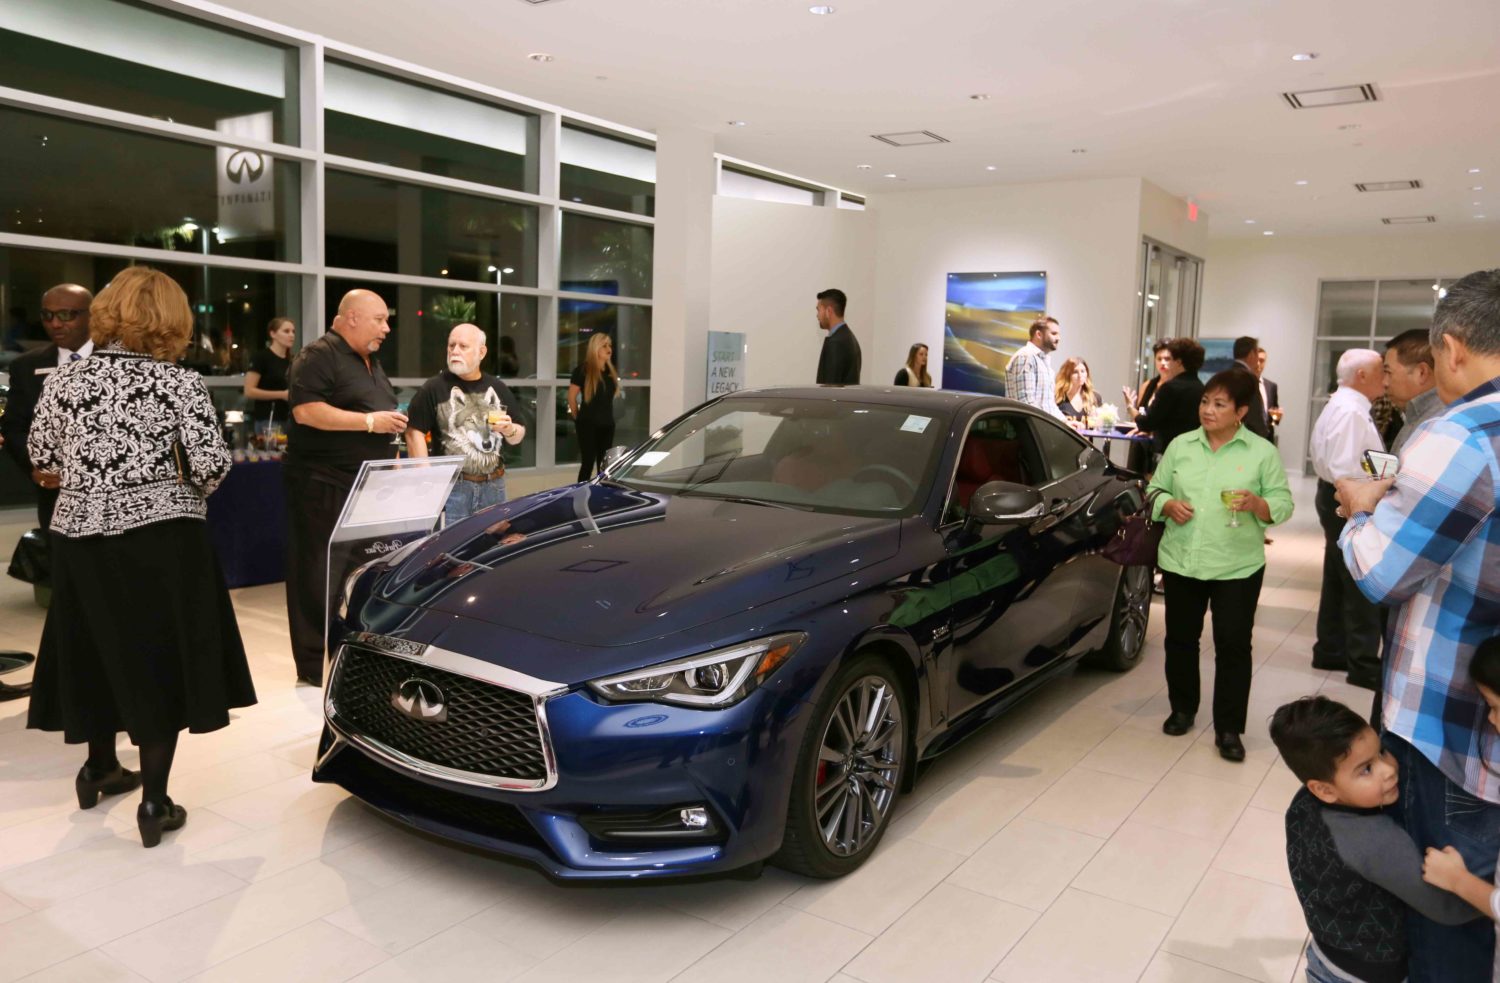 Park Place Infiniti this month celebrated the arrival of two of the newest Infiniti models to the dealership at 5555 W. Sahara Ave.